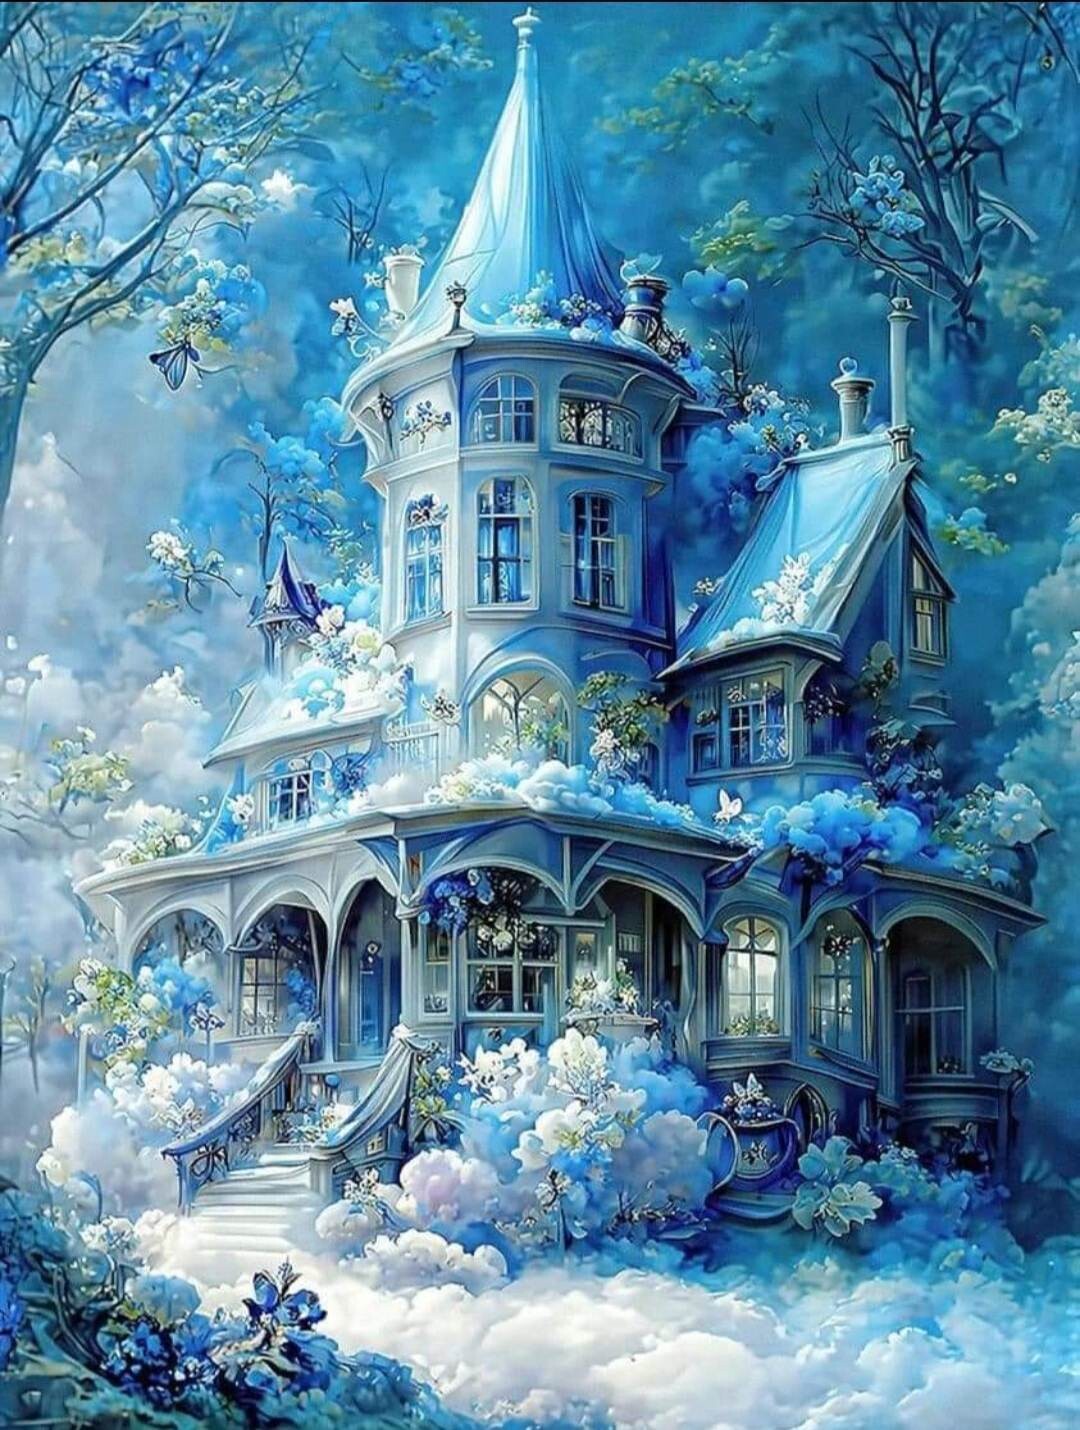 Blue Mansion 989 - Specially ordered for you. Delivery is approximately 4 - 6 weeks.